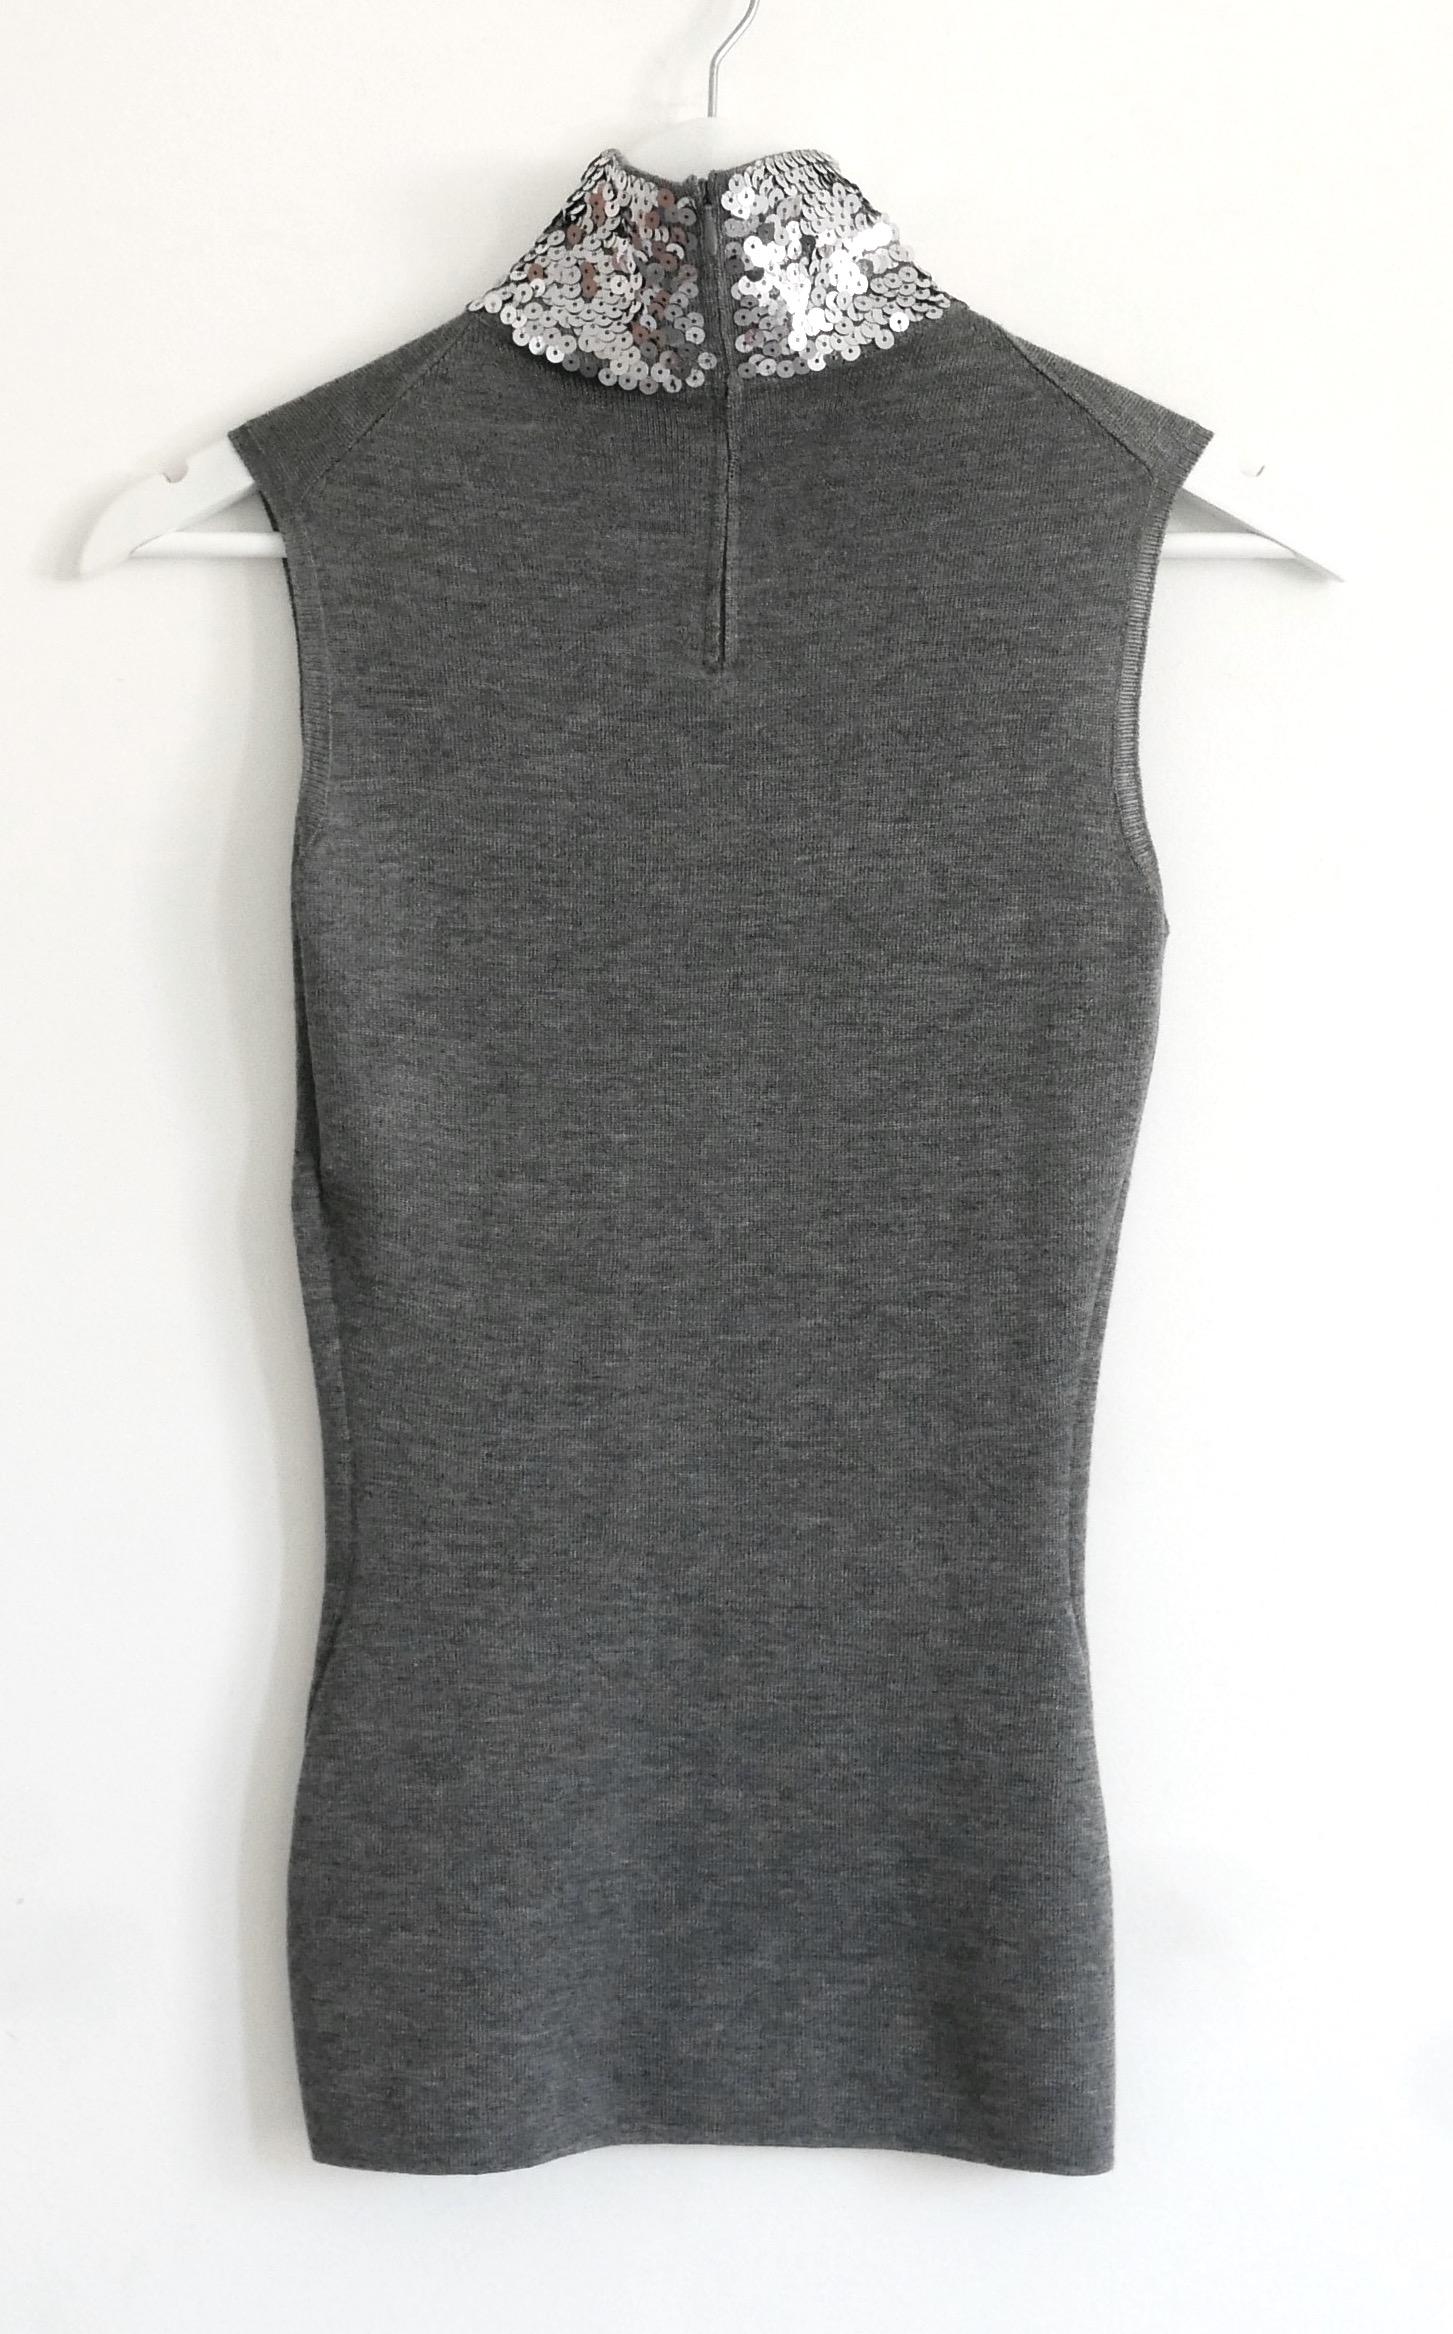 Dior x Raf Simons Pre-Fall 2015 Sequin High Neck Sleeveless Sweater  In New Condition For Sale In London, GB